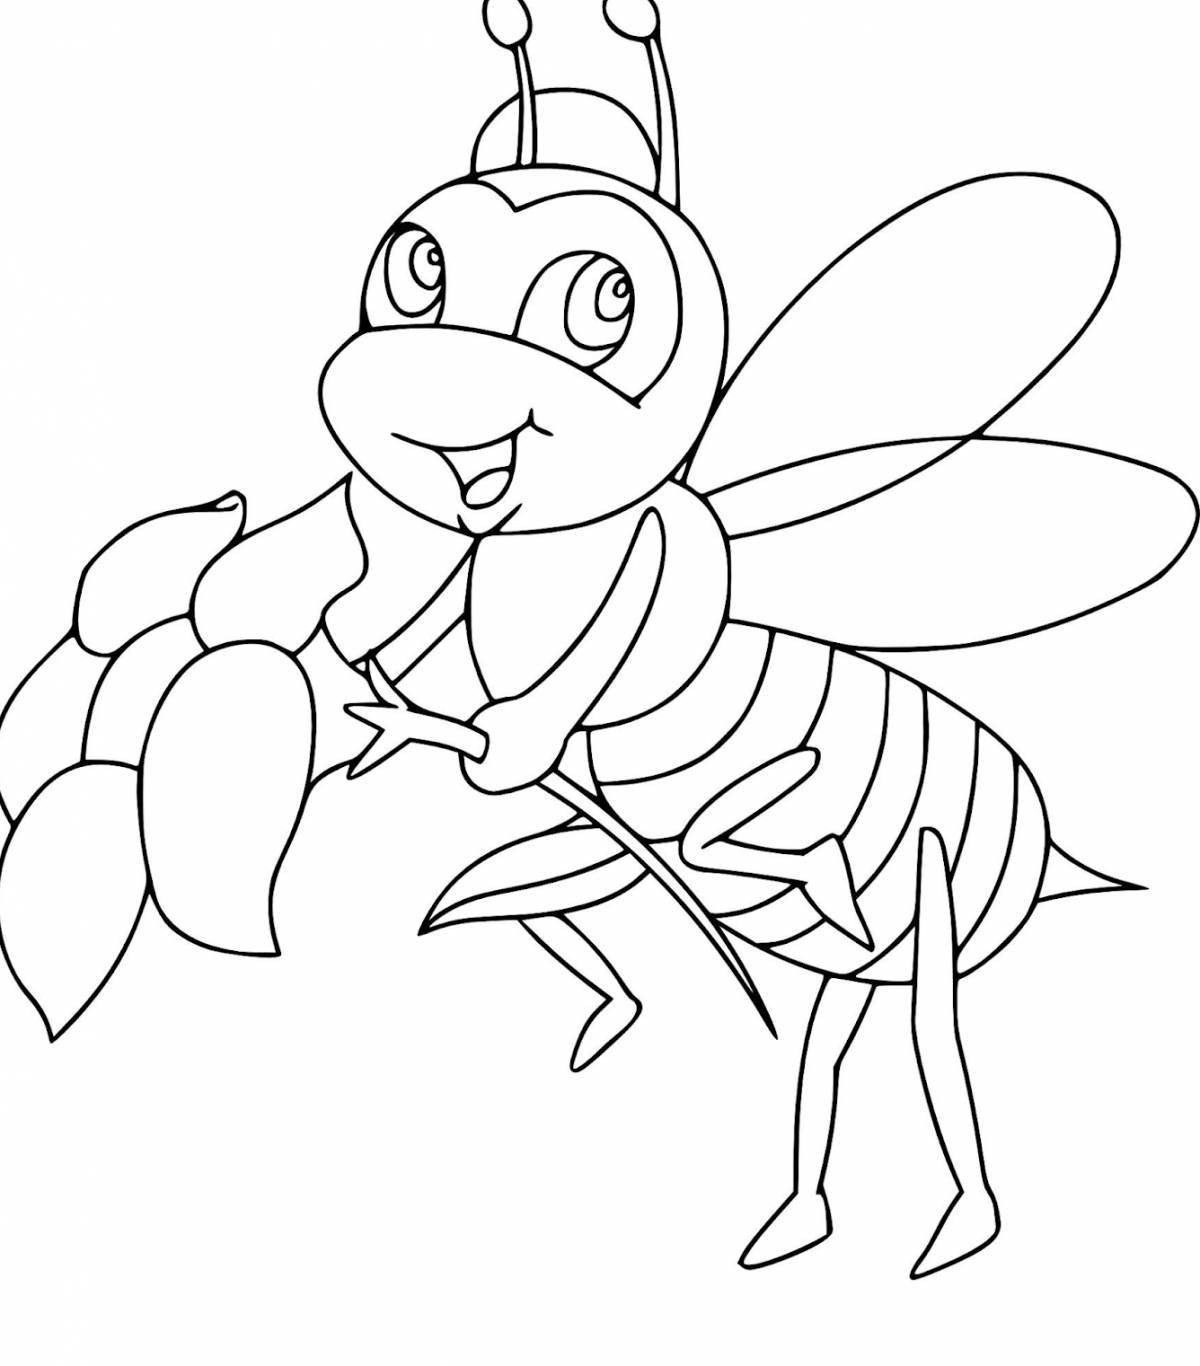 Coloring book bright cat and bee